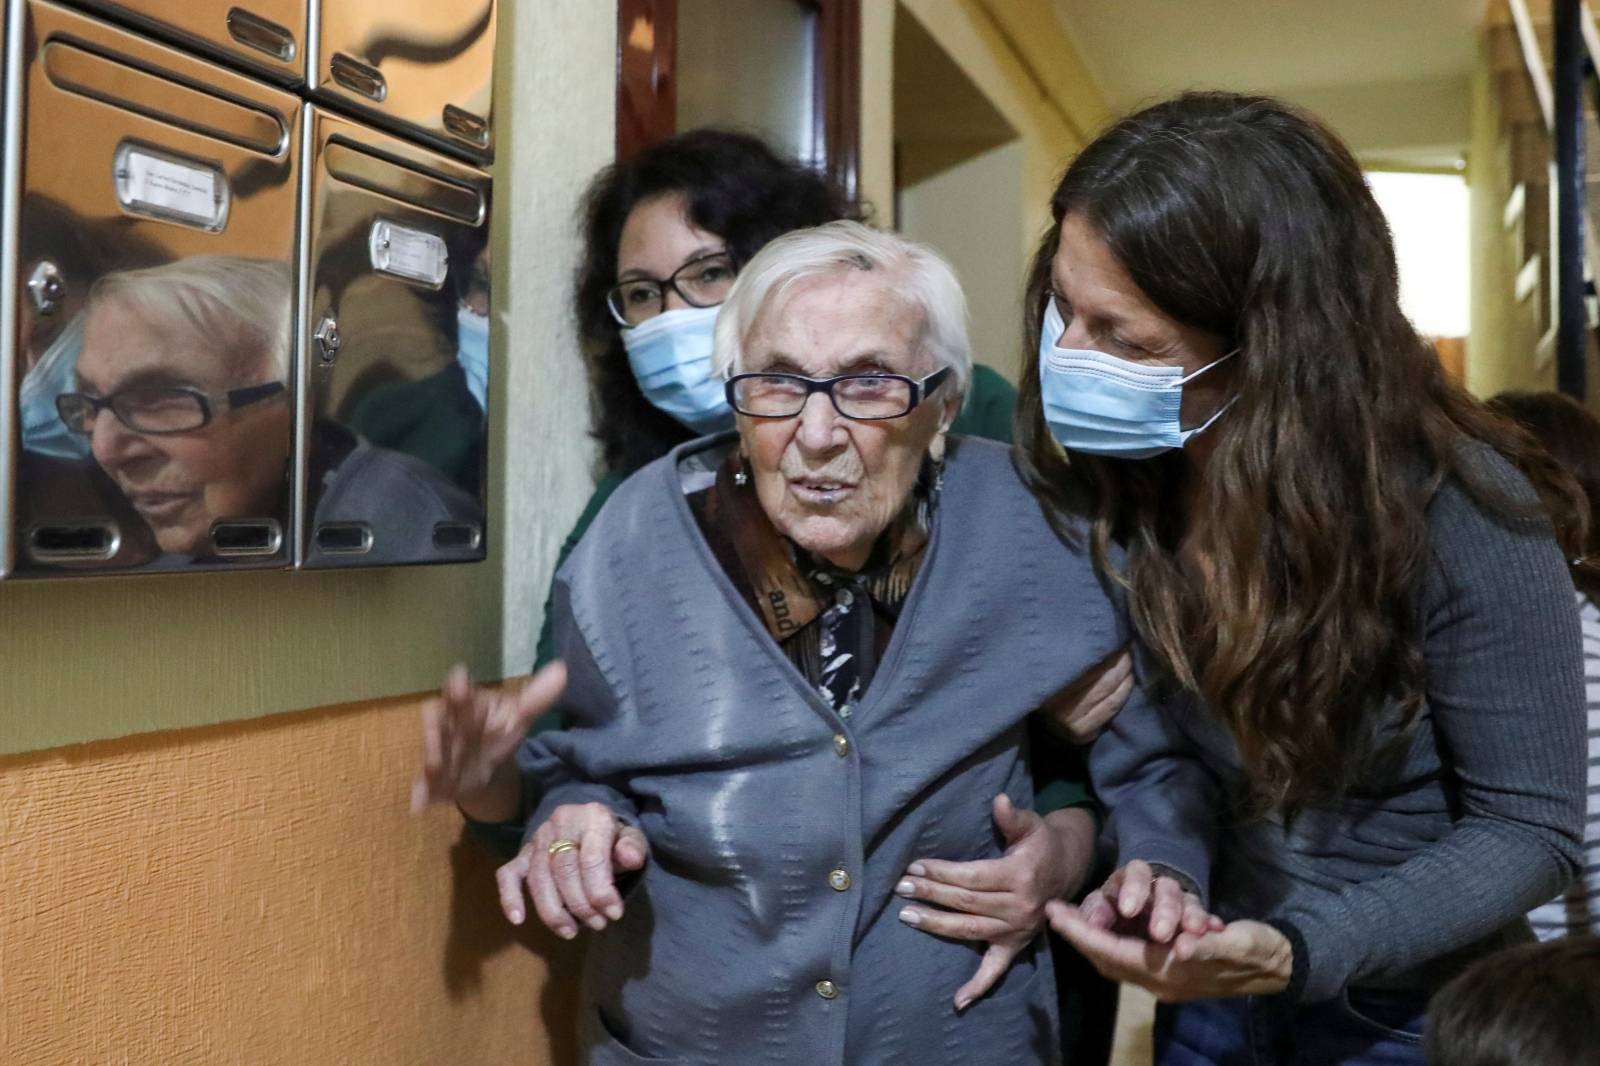 Florentina Martin, a 99 year-old woman who survived coronavirus disease (COVID-19), is helped by her caregiver Olga Arauz and her granddaughter Noelia Valle at the entrance of her home in Pinto